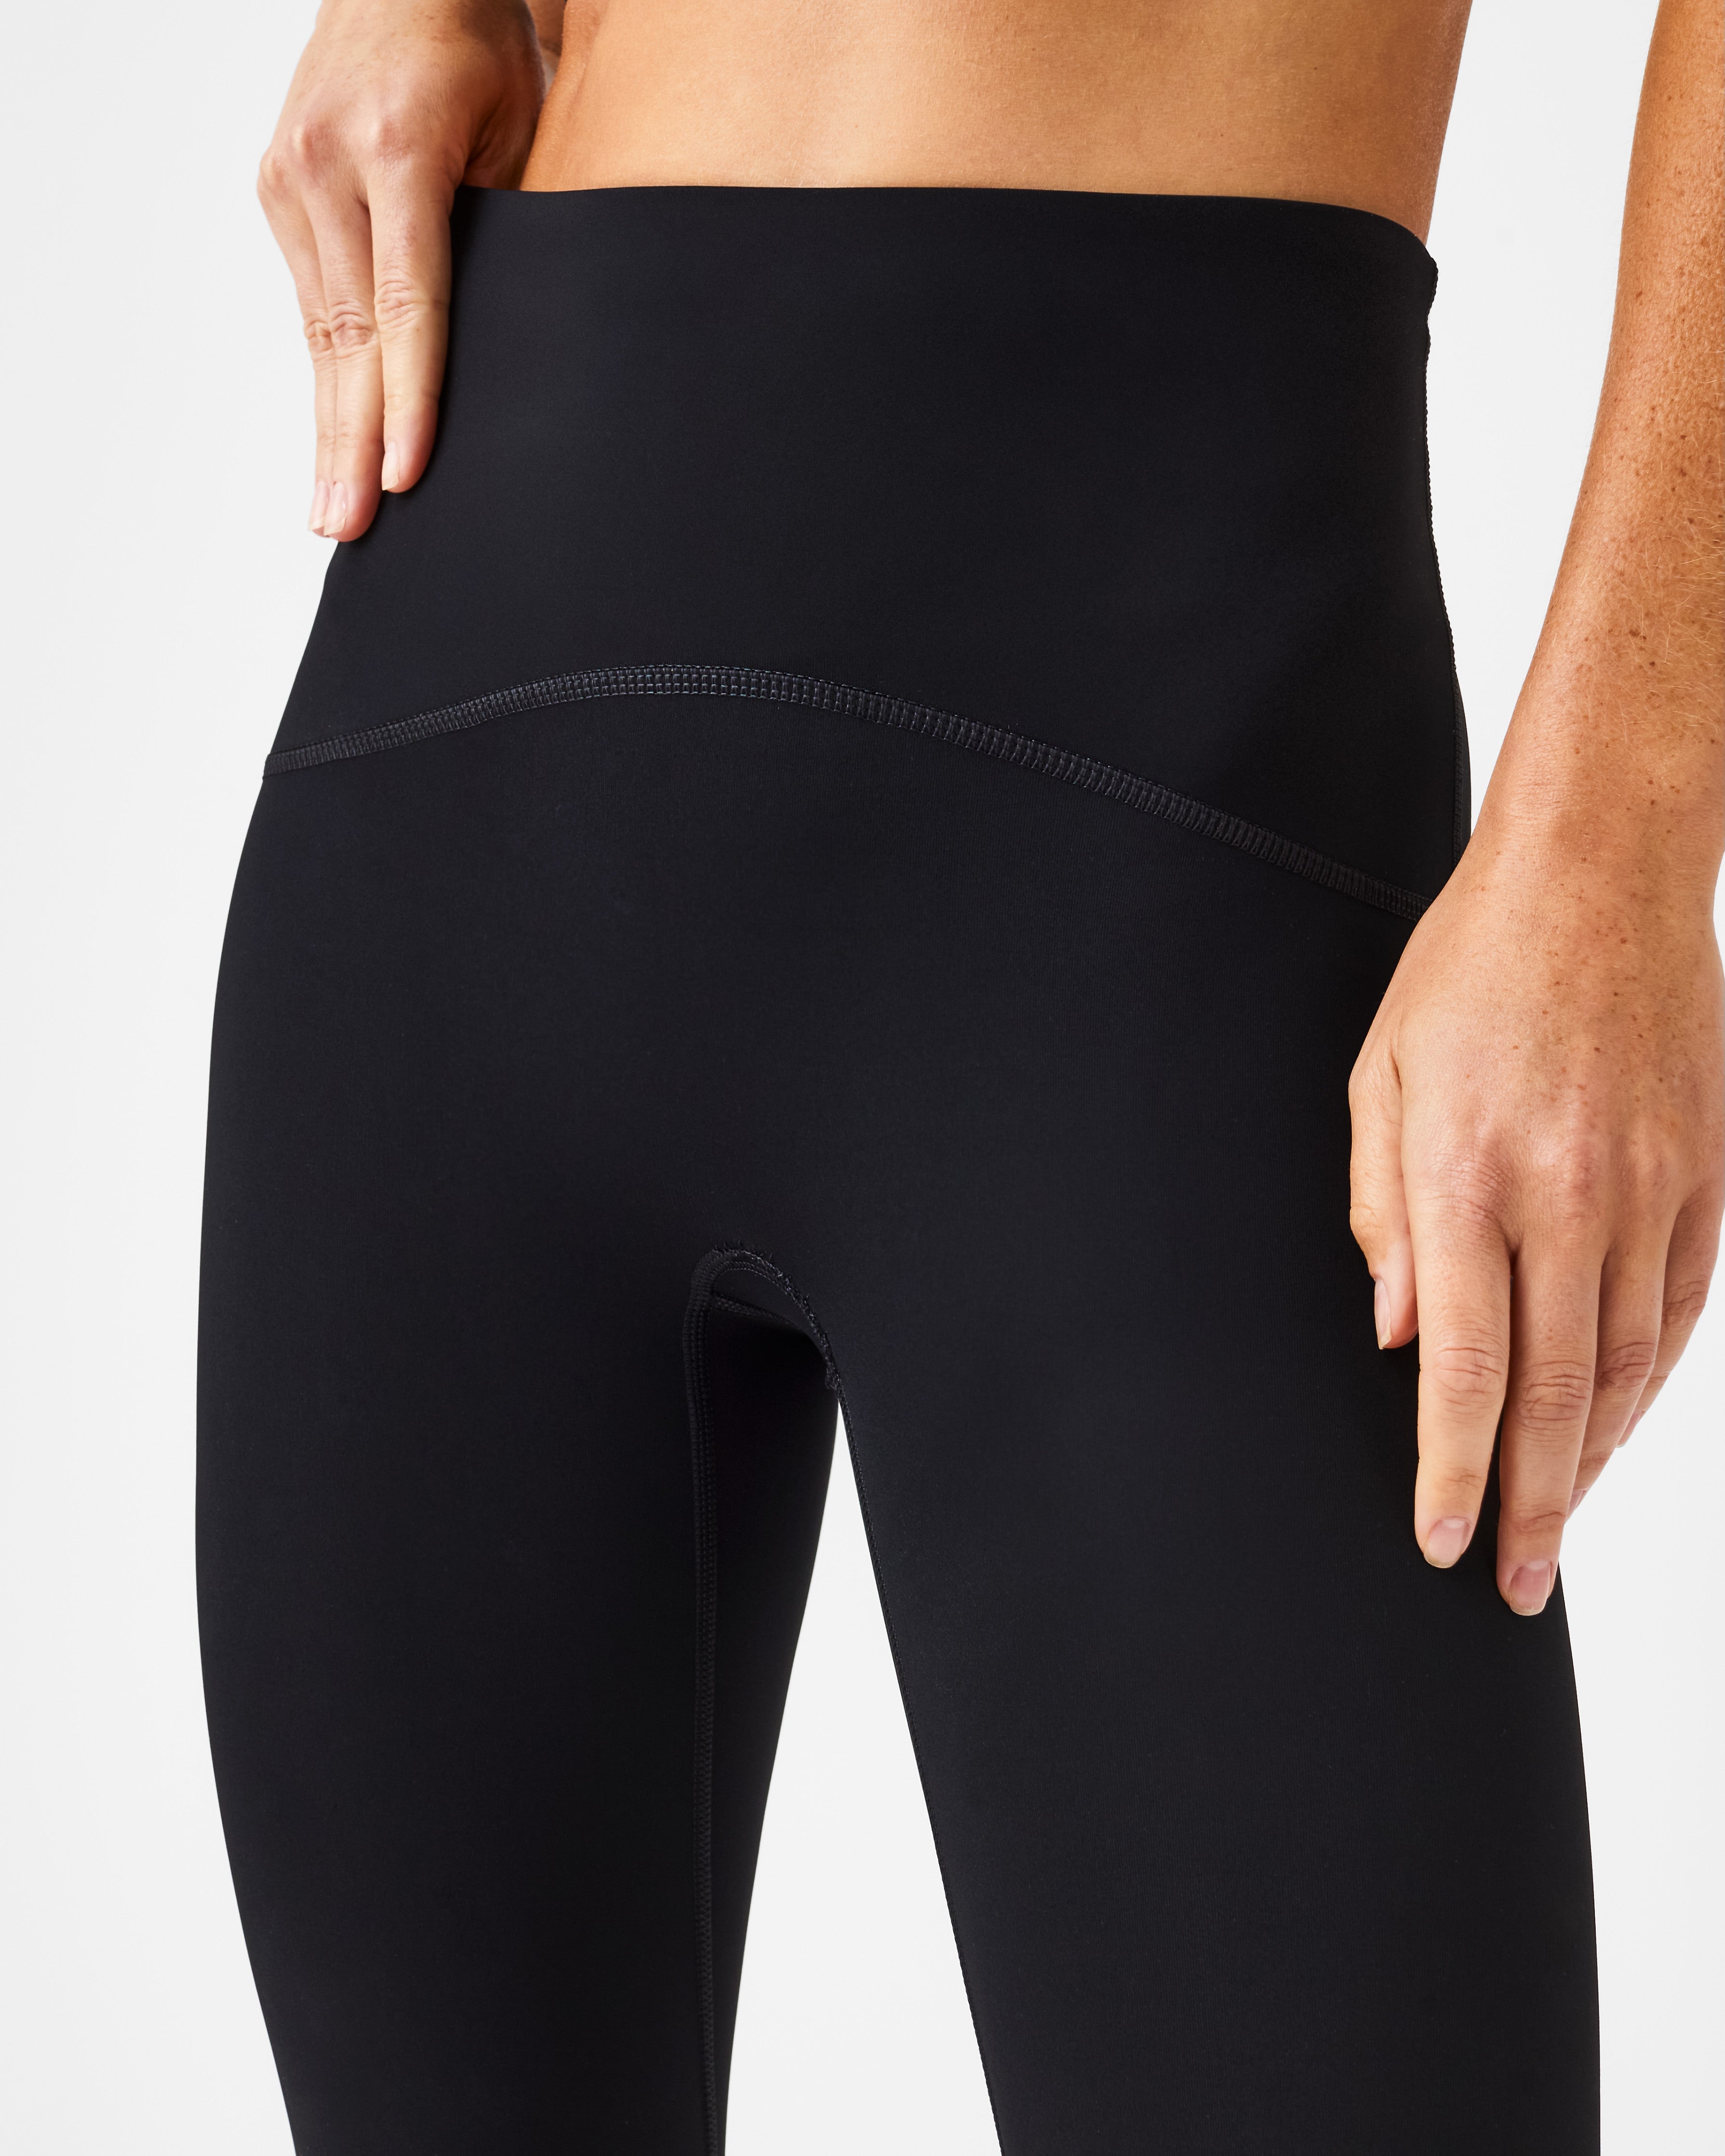 The Booty Boost Active 7/8 Leggings by Spanx – The Pretty Pink Rooster  Boutique